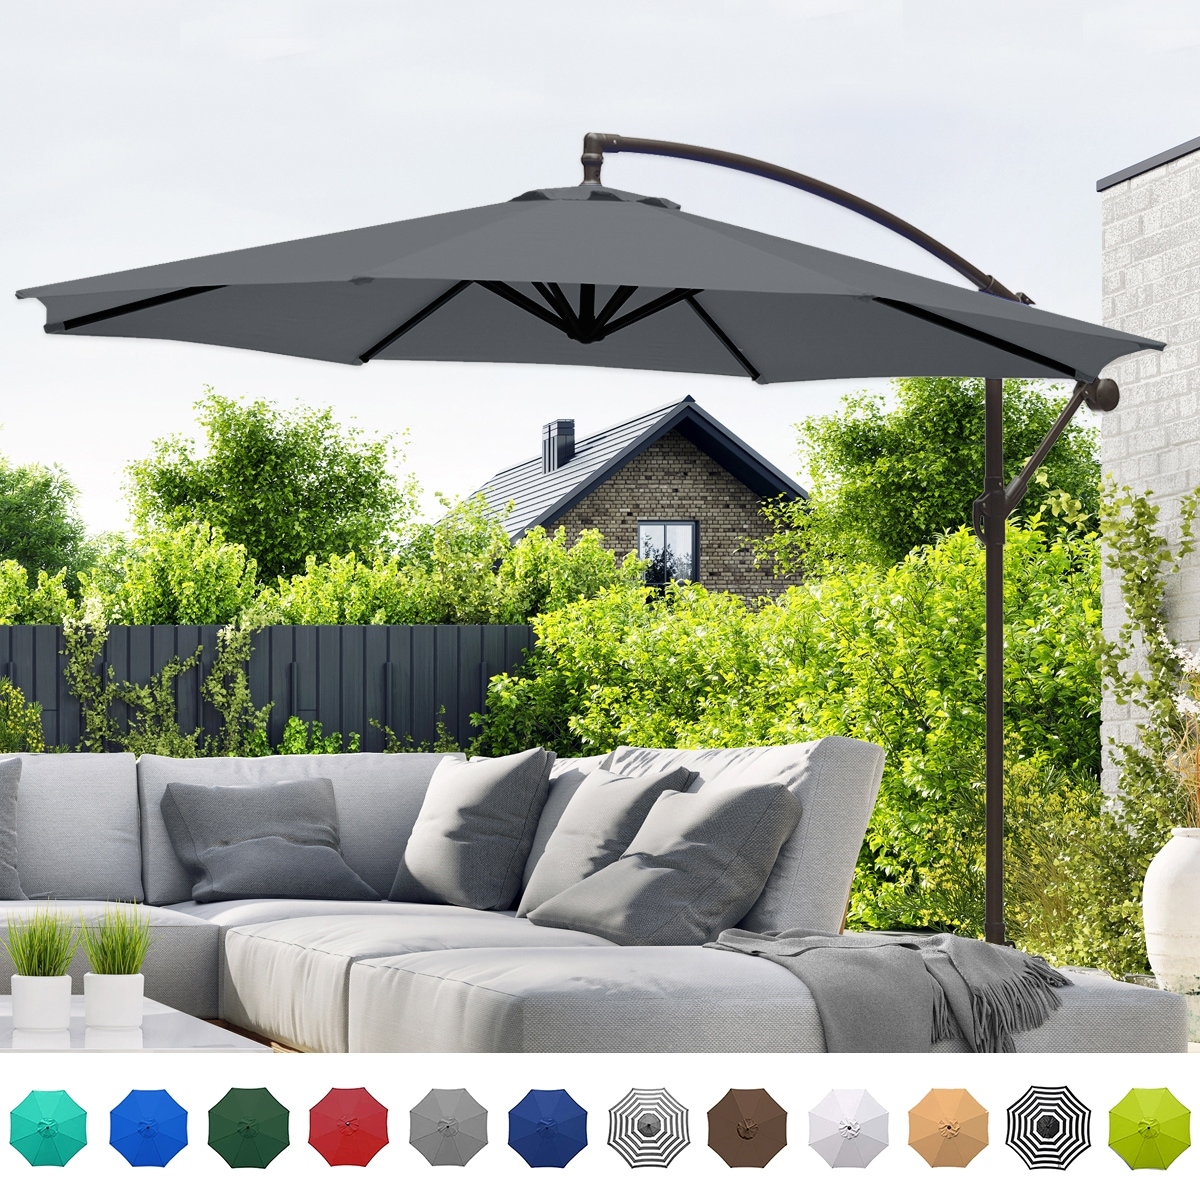 New Hanging Patio Umbrella 10ft Offset Rectangular Cantilever with Cross Base 